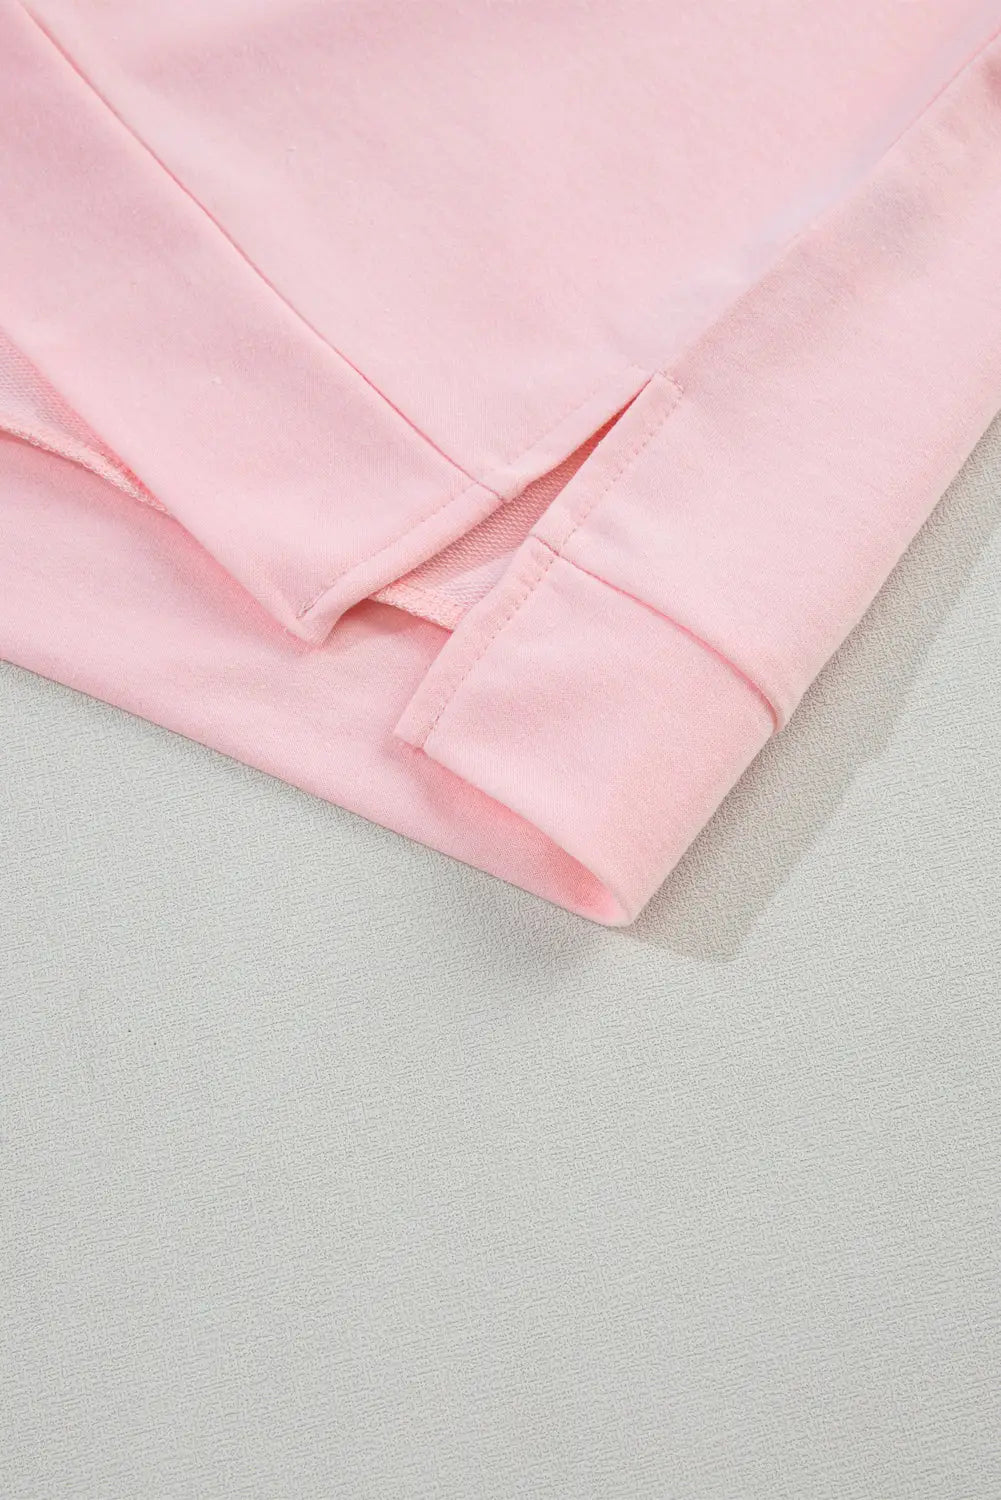 Pink collared v neck puff sleeve t-shirt - tops